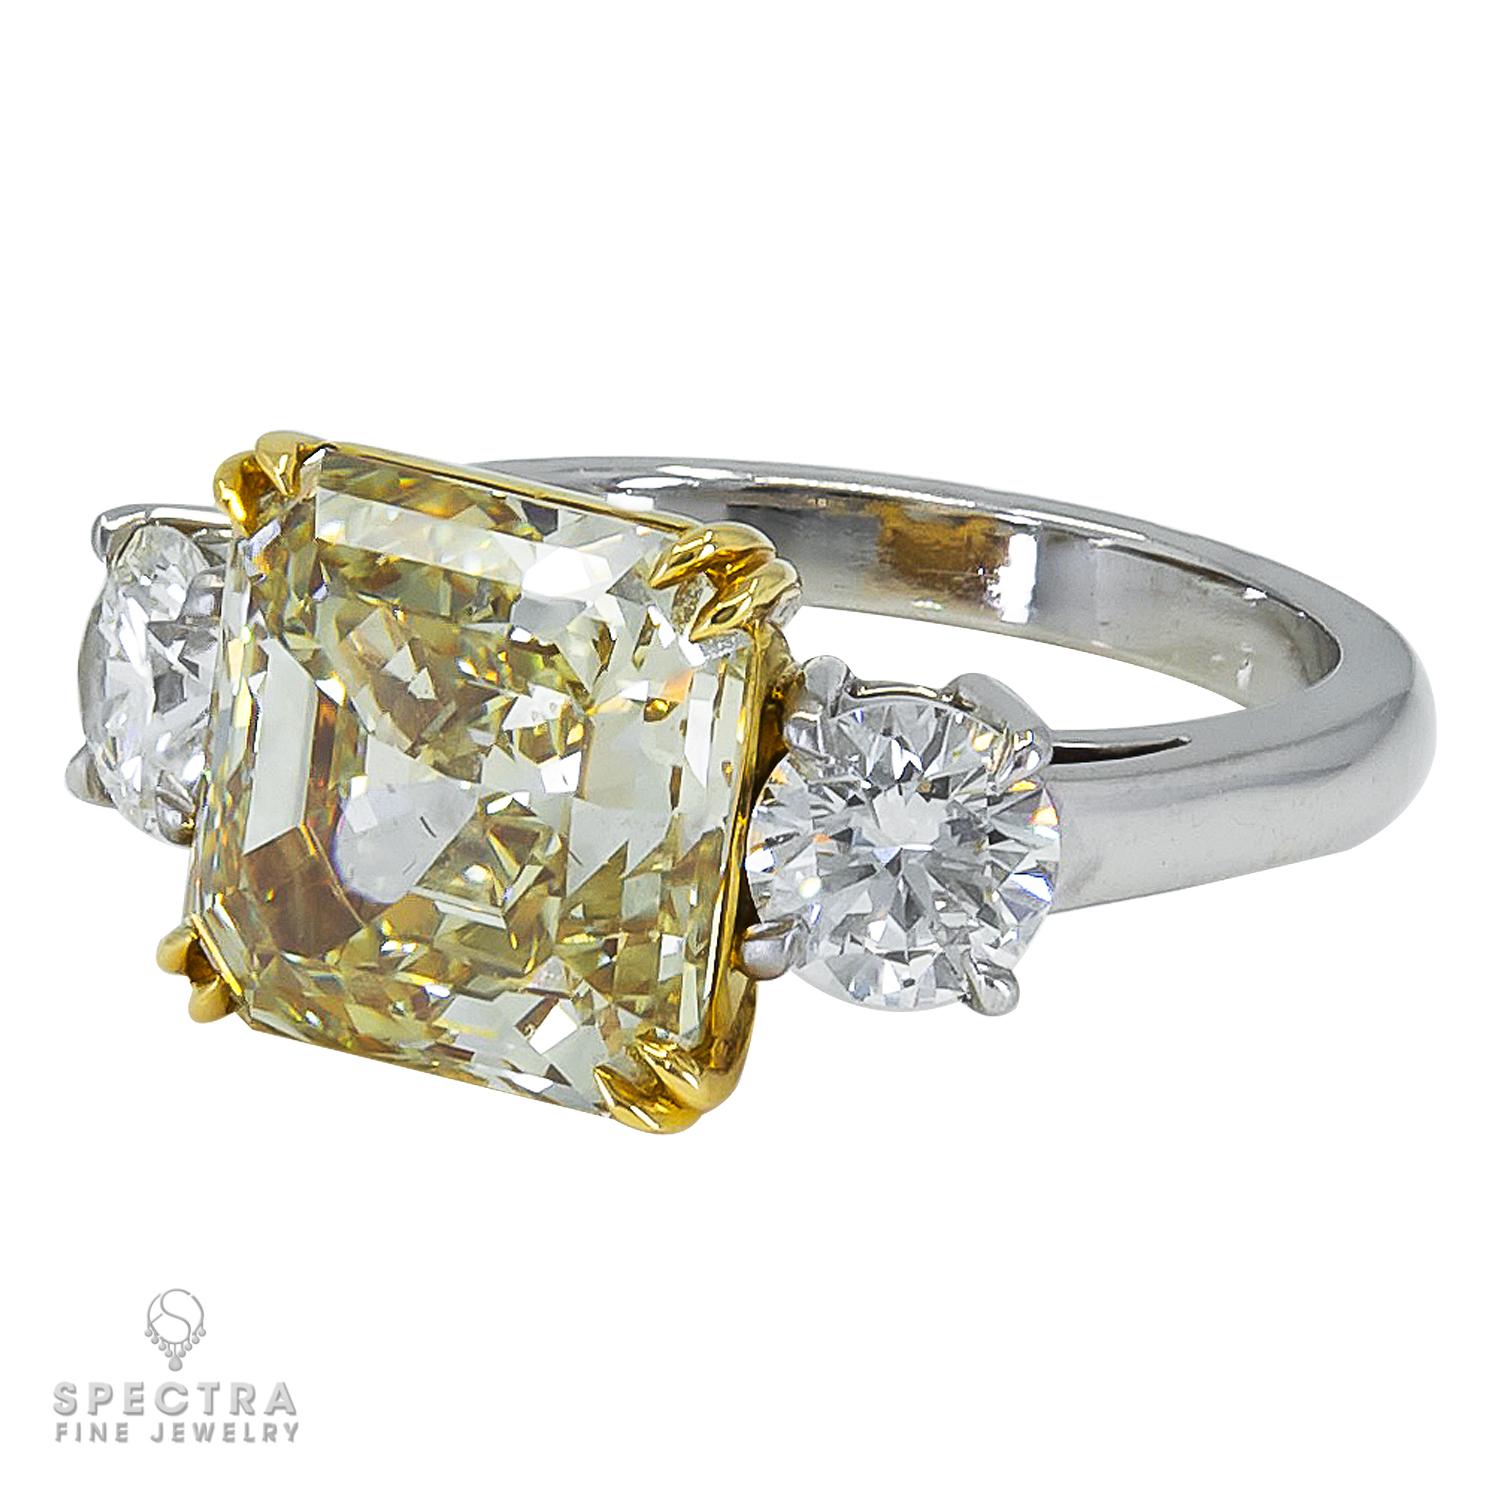 A beautiful cocktail ring set with a square emerald-cut diamond of fancy greenish yellow color and VS1 clarity.
Carat weight is 5.67. Certified by GIA.
Two white round diamonds on both sides:
0.5 carat H SI1 and
0.5 carat H VS2.
Both are certified